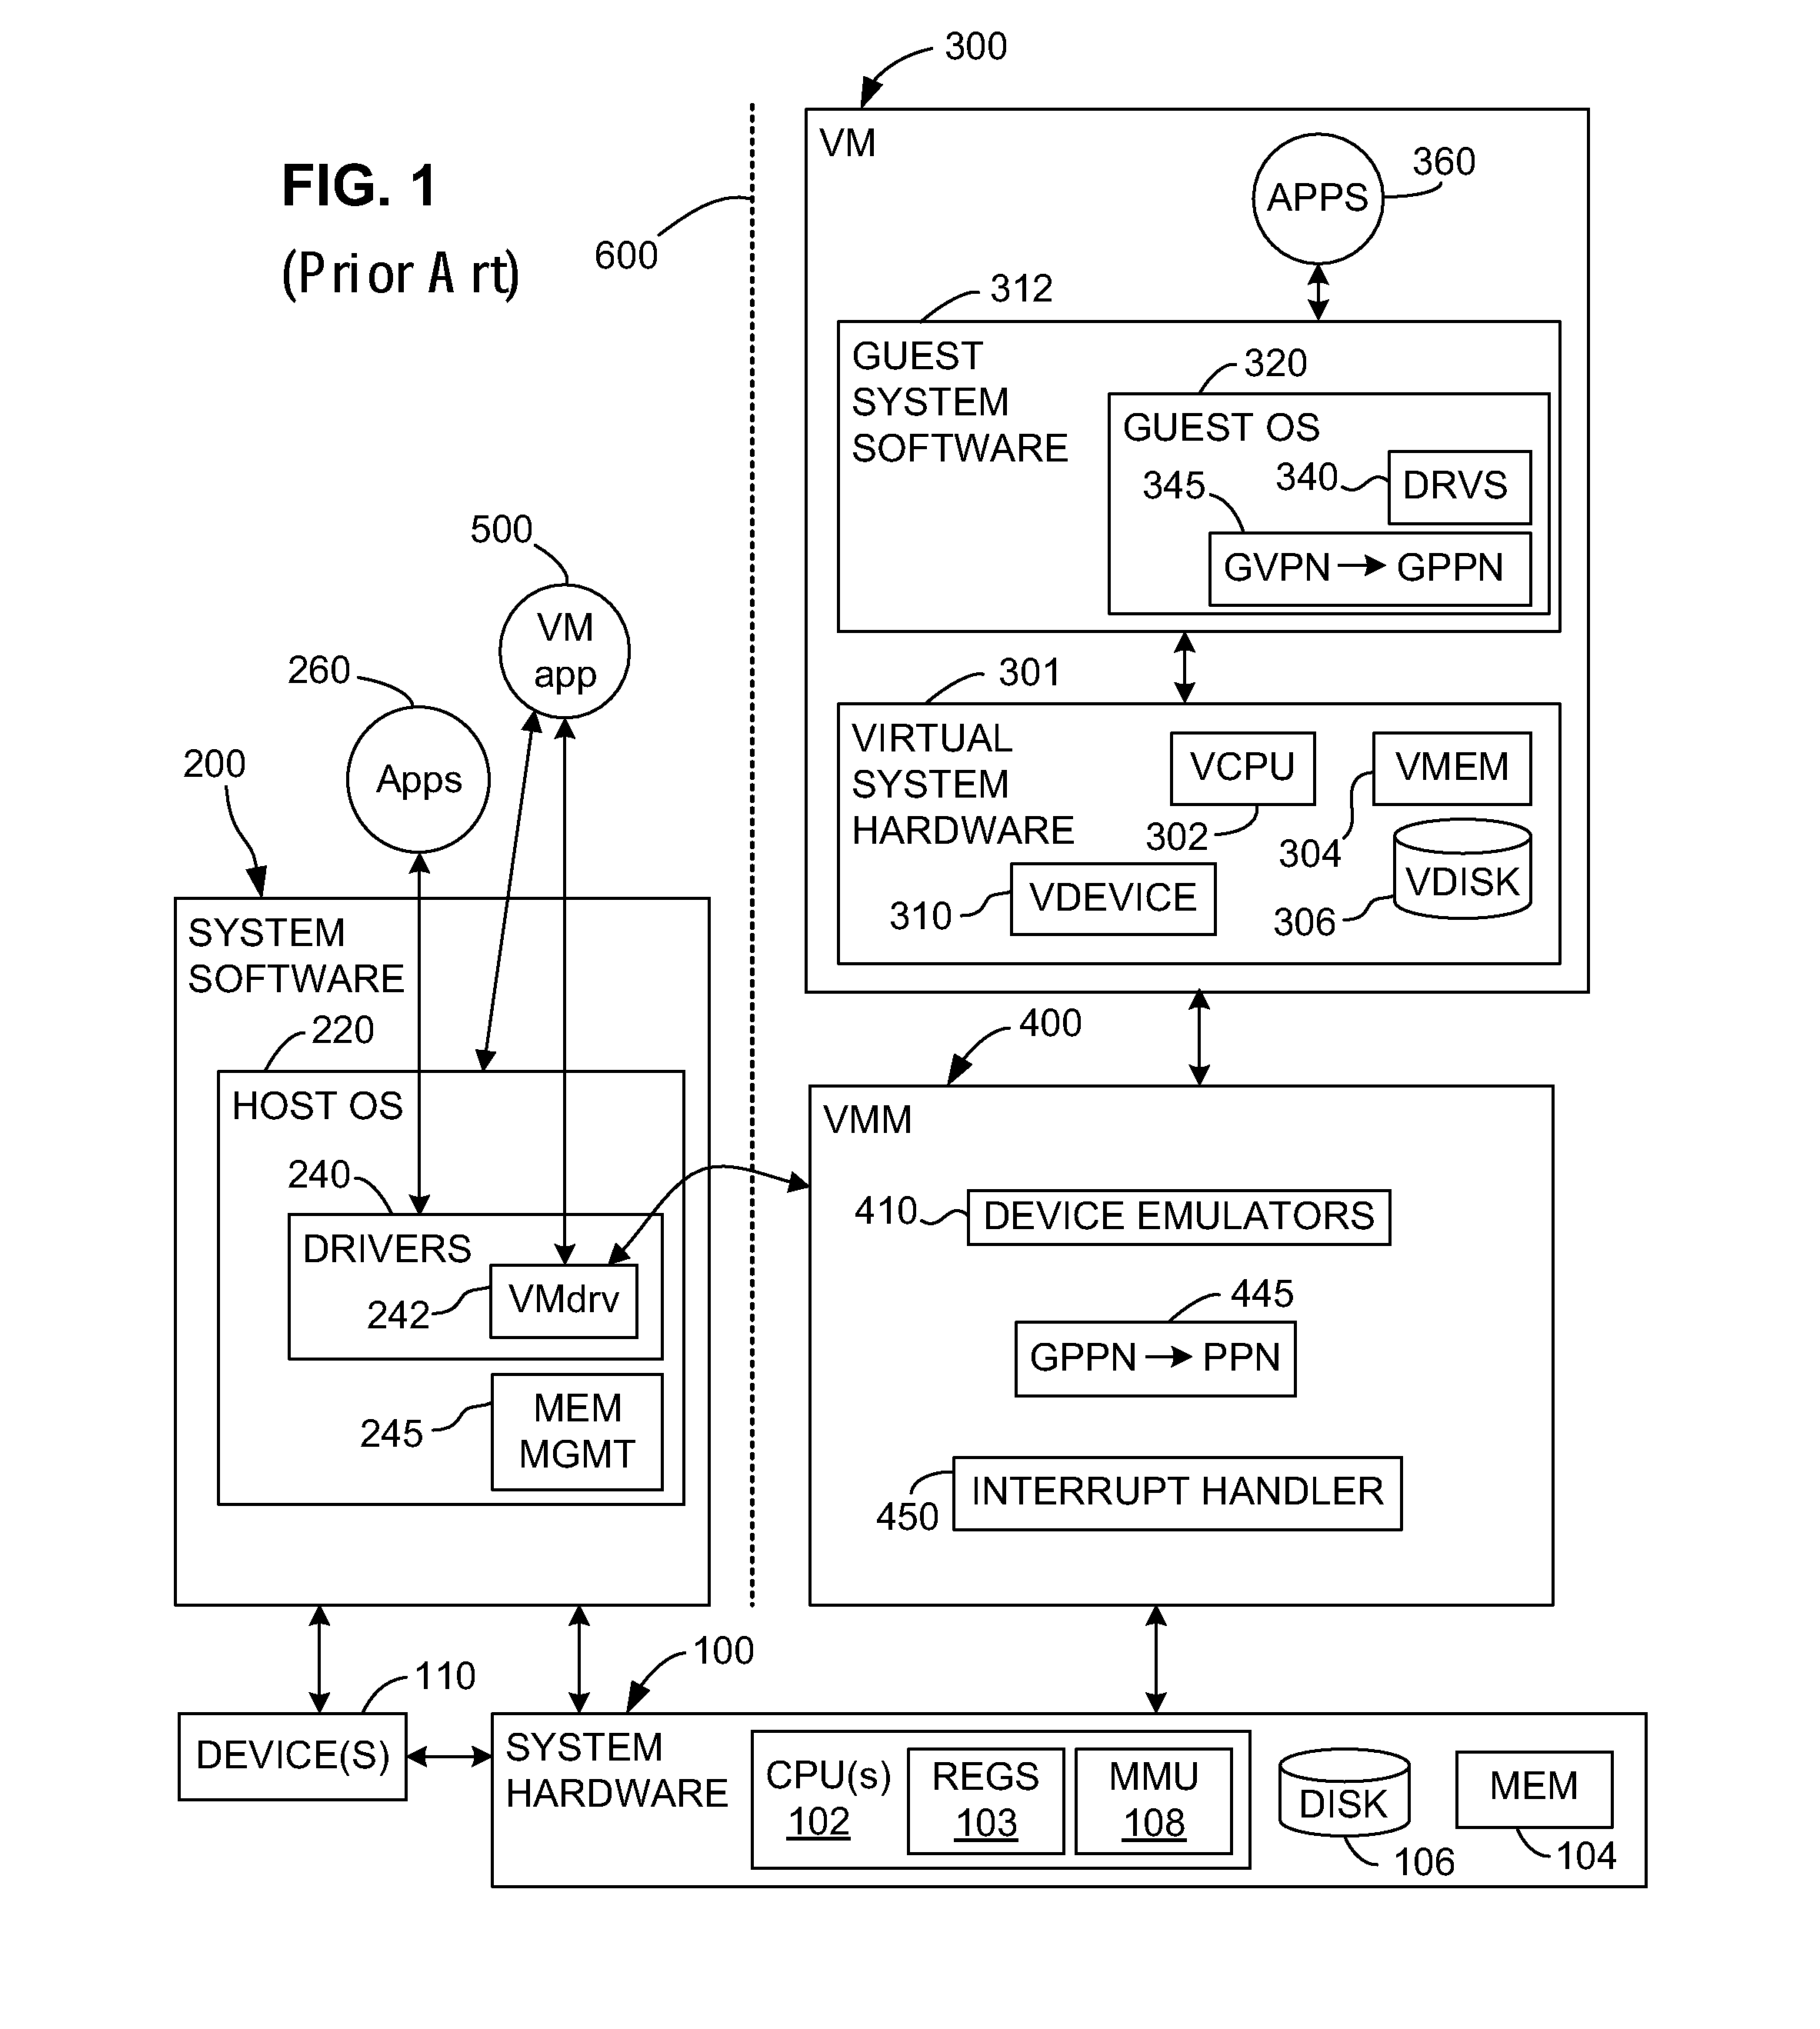 Switching between multiple software entities using different operating modes of a processor in a computer system